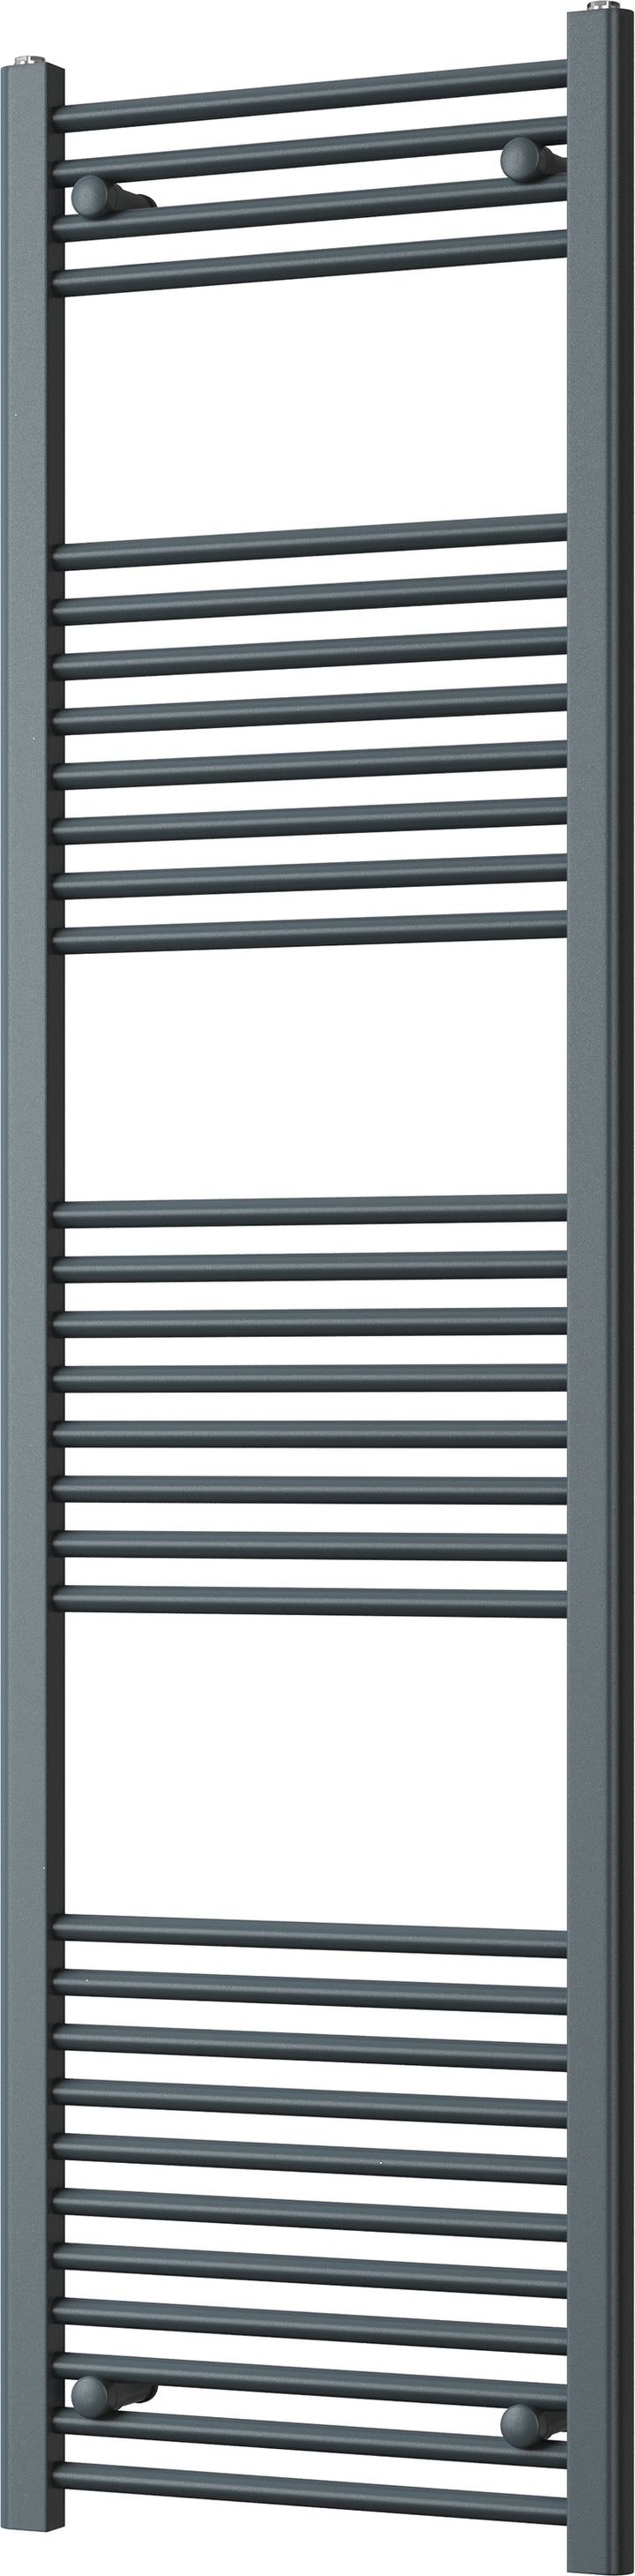 Zennor - Anthracite Heated Towel Rail - H1800mm x W500mm - Straight